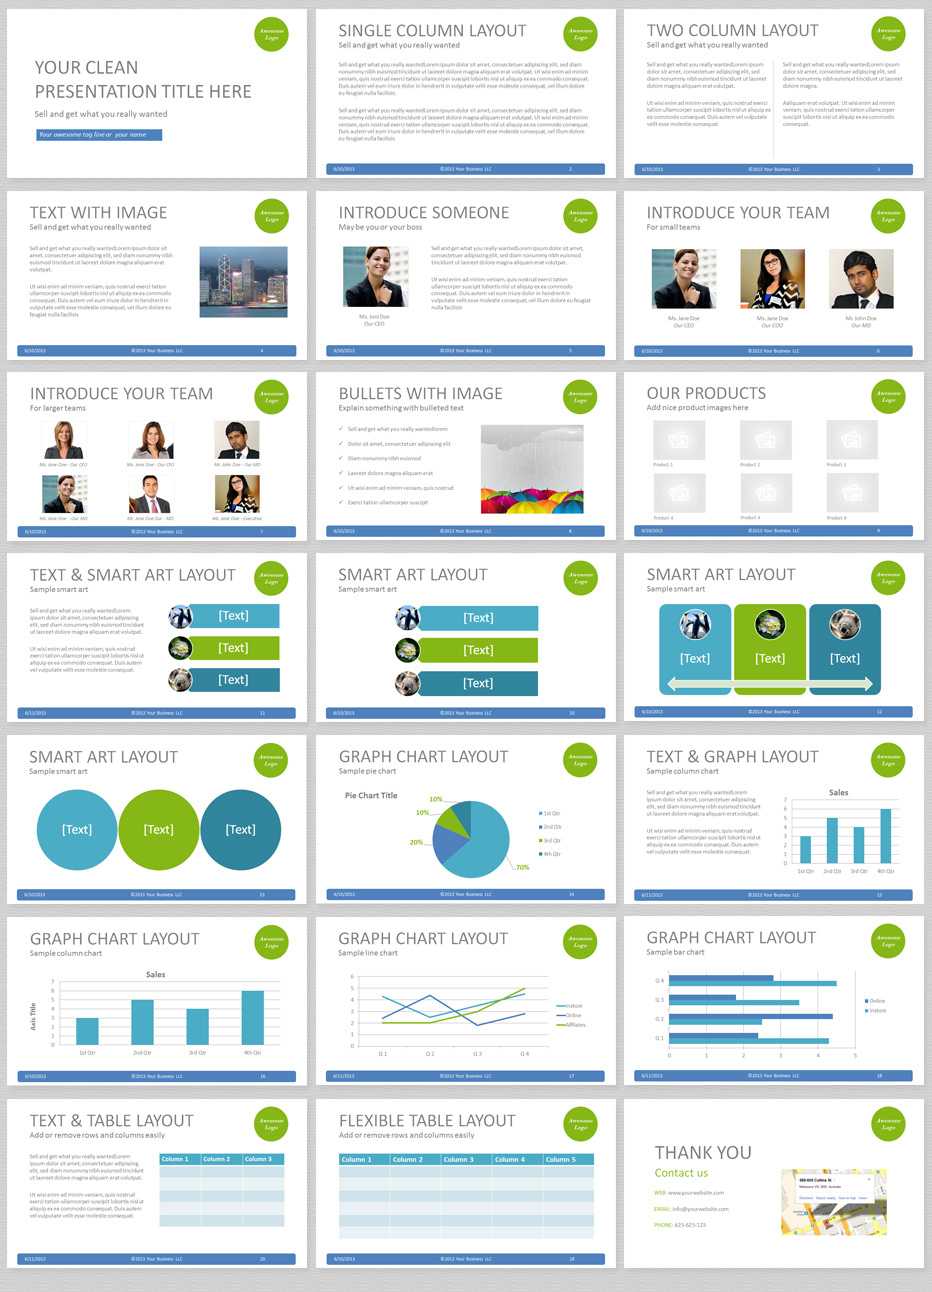 Powerpoint 2007 Template Free Download – Atlantaauctionco Intended For Powerpoint 2007 Template Free Download